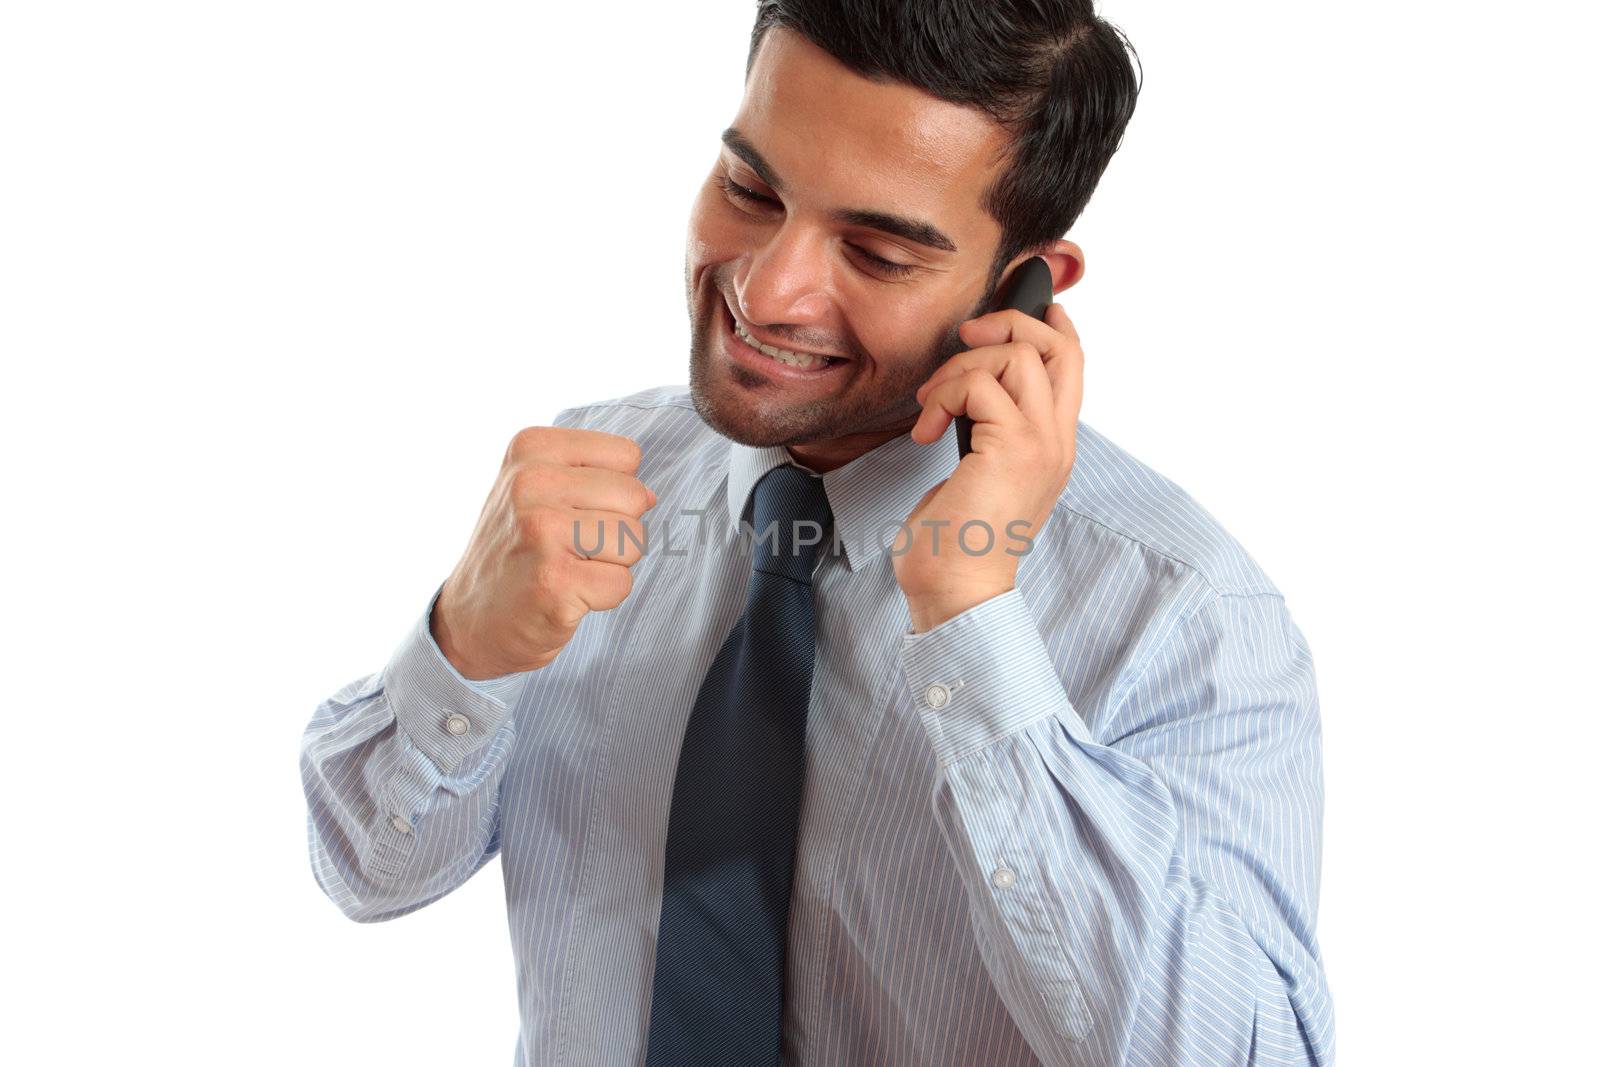 A very happy businessman or salesman on a telephone call and making a fist of success or achievement.  Sales deal, new job, promotion etc.